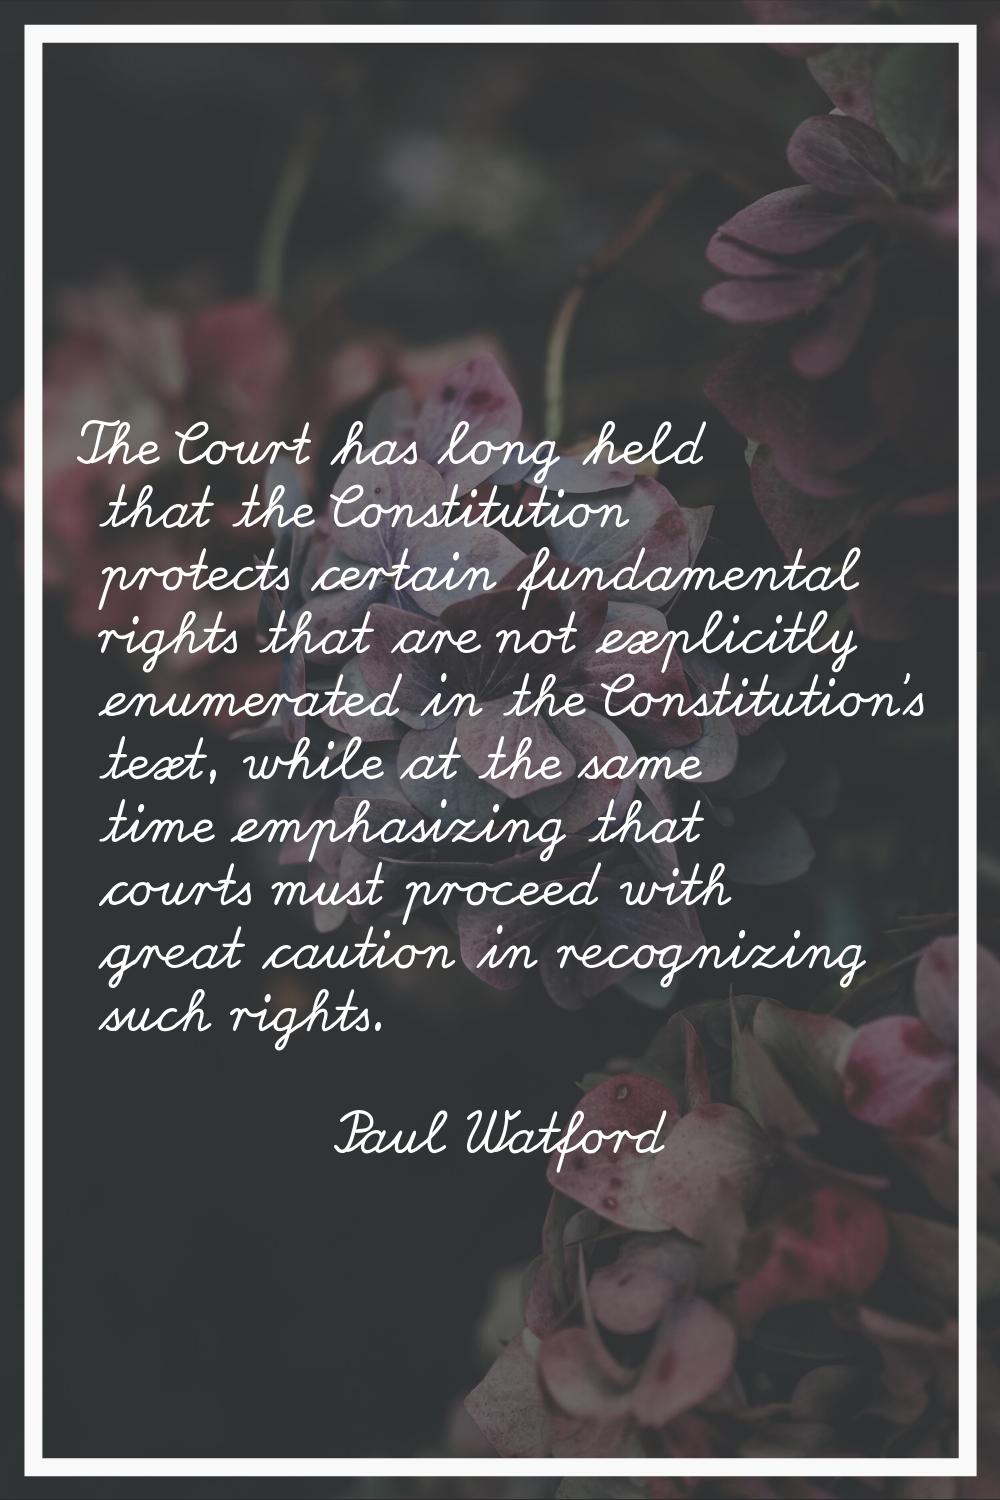 The Court has long held that the Constitution protects certain fundamental rights that are not expl